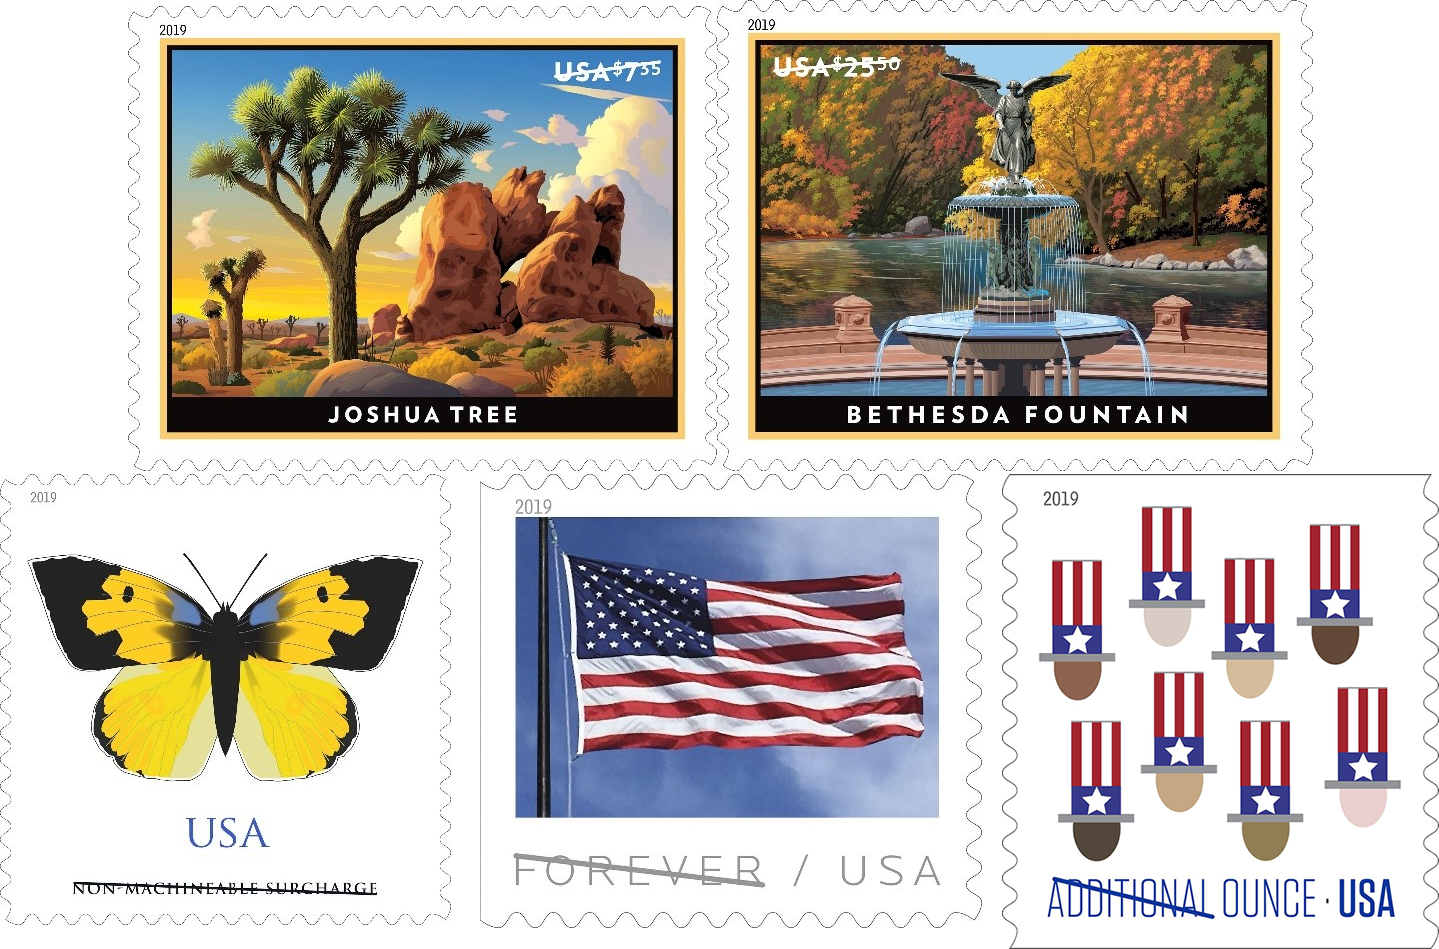 Priority Mail and Priority Mail Express stamps